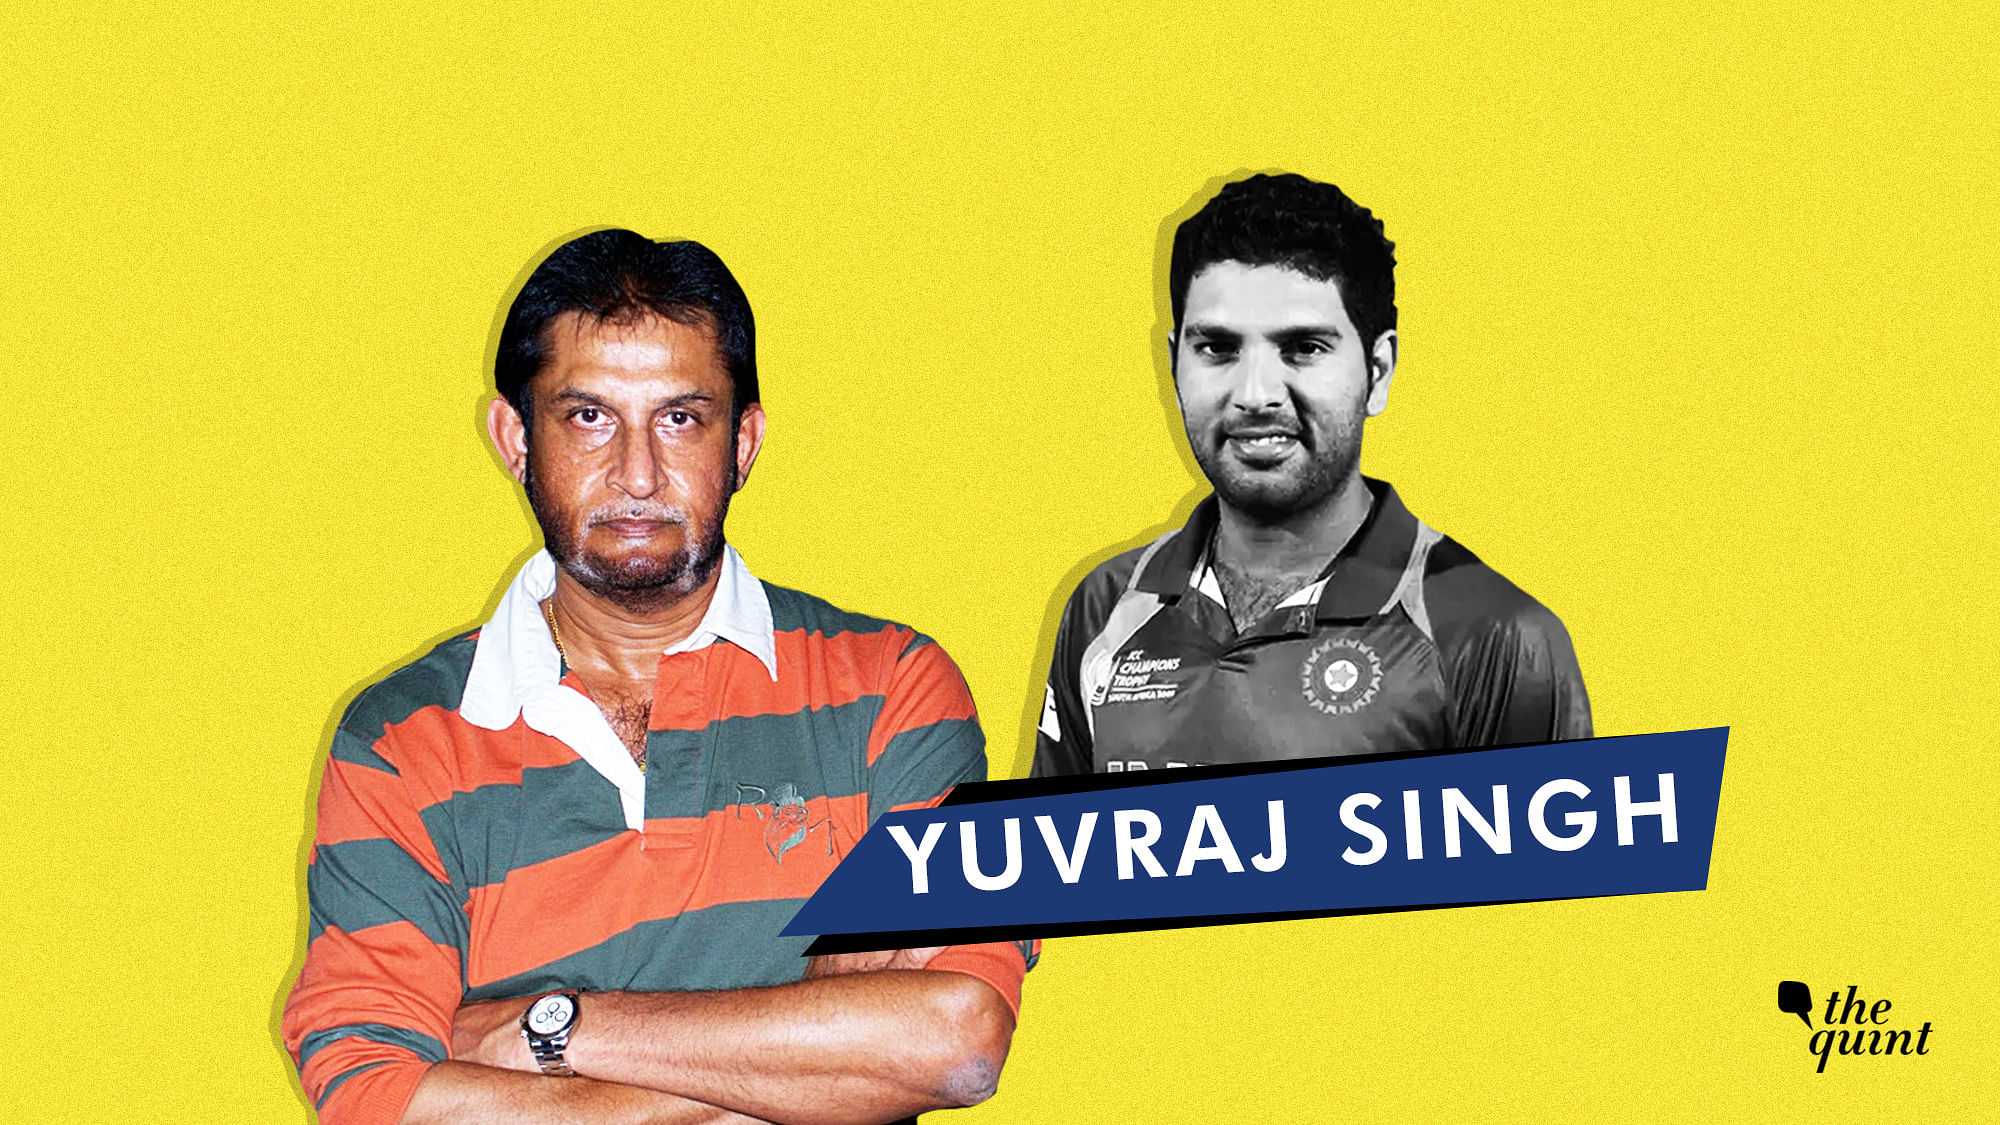 Sandeep Patil writes about Yuvraj Singh, a cricketer he first met on his first birthday!